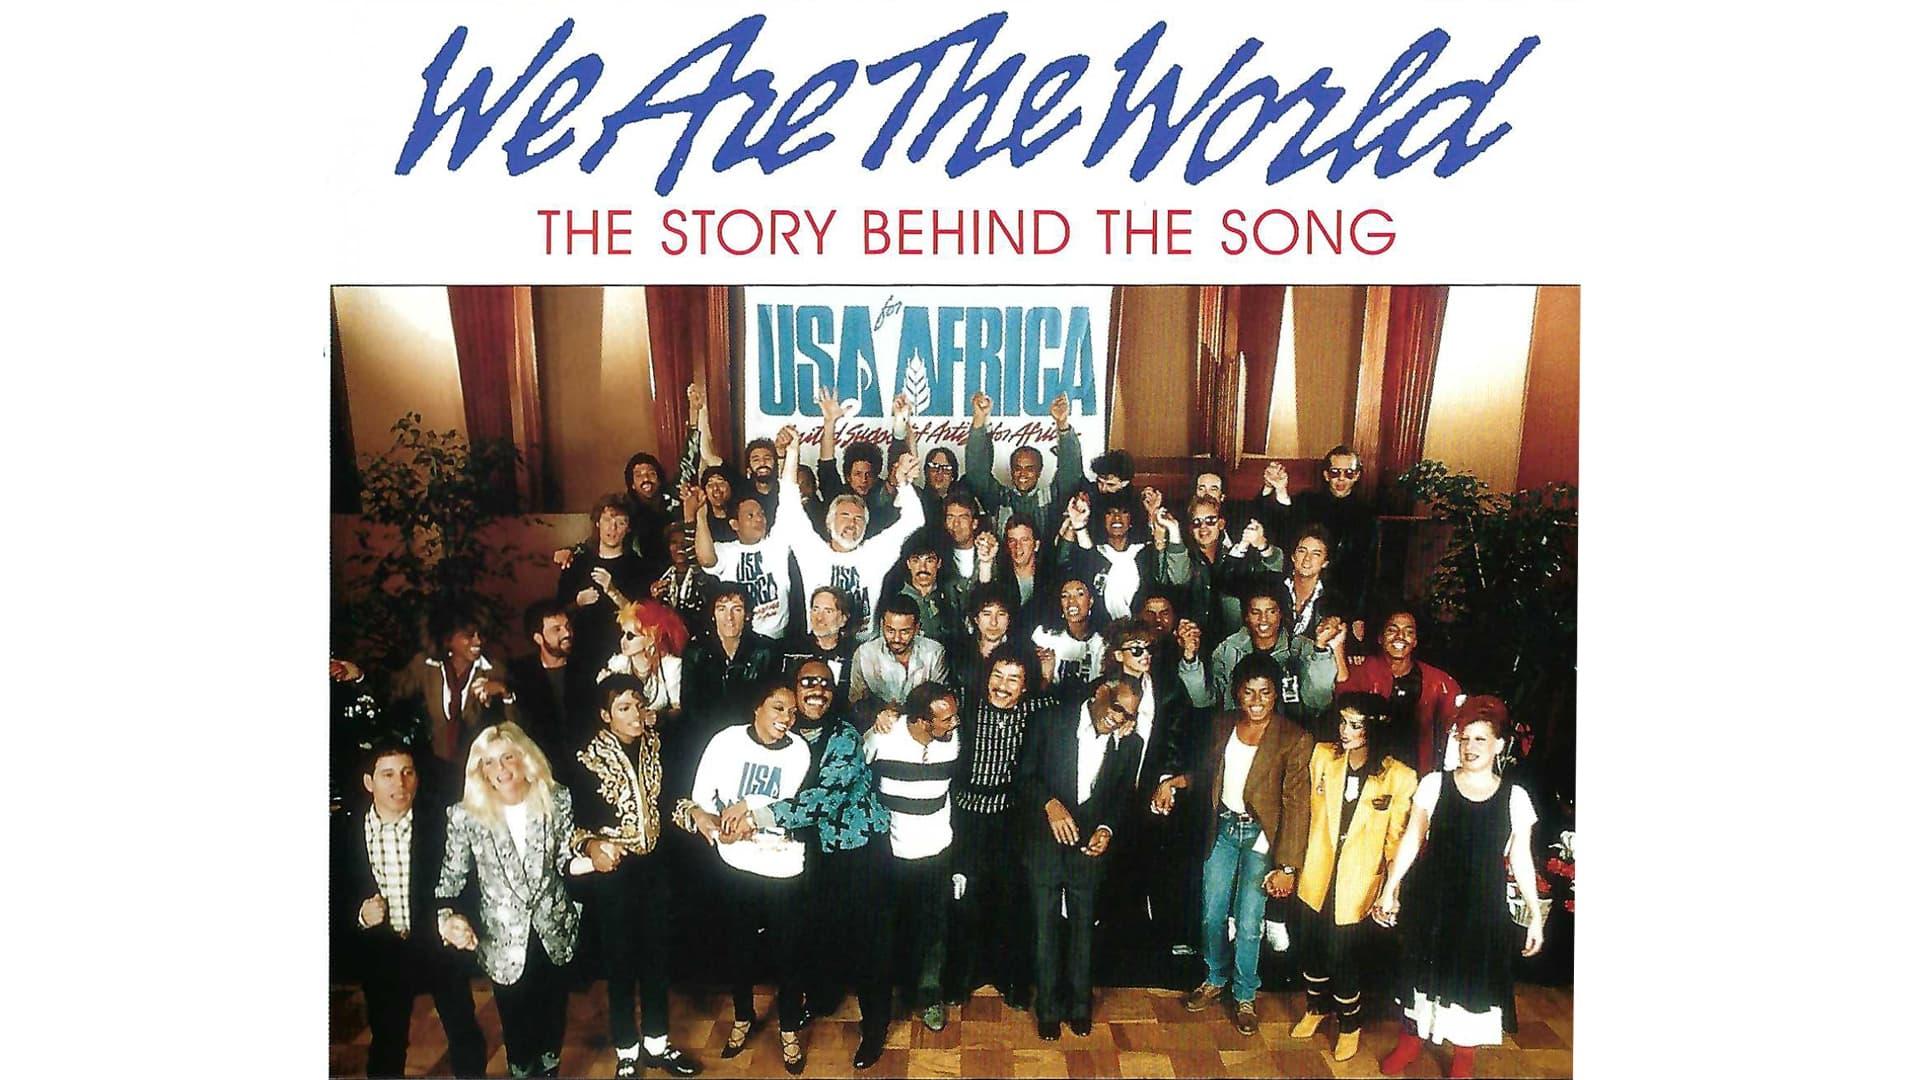 We Are the World: The Story Behind the Song backdrop